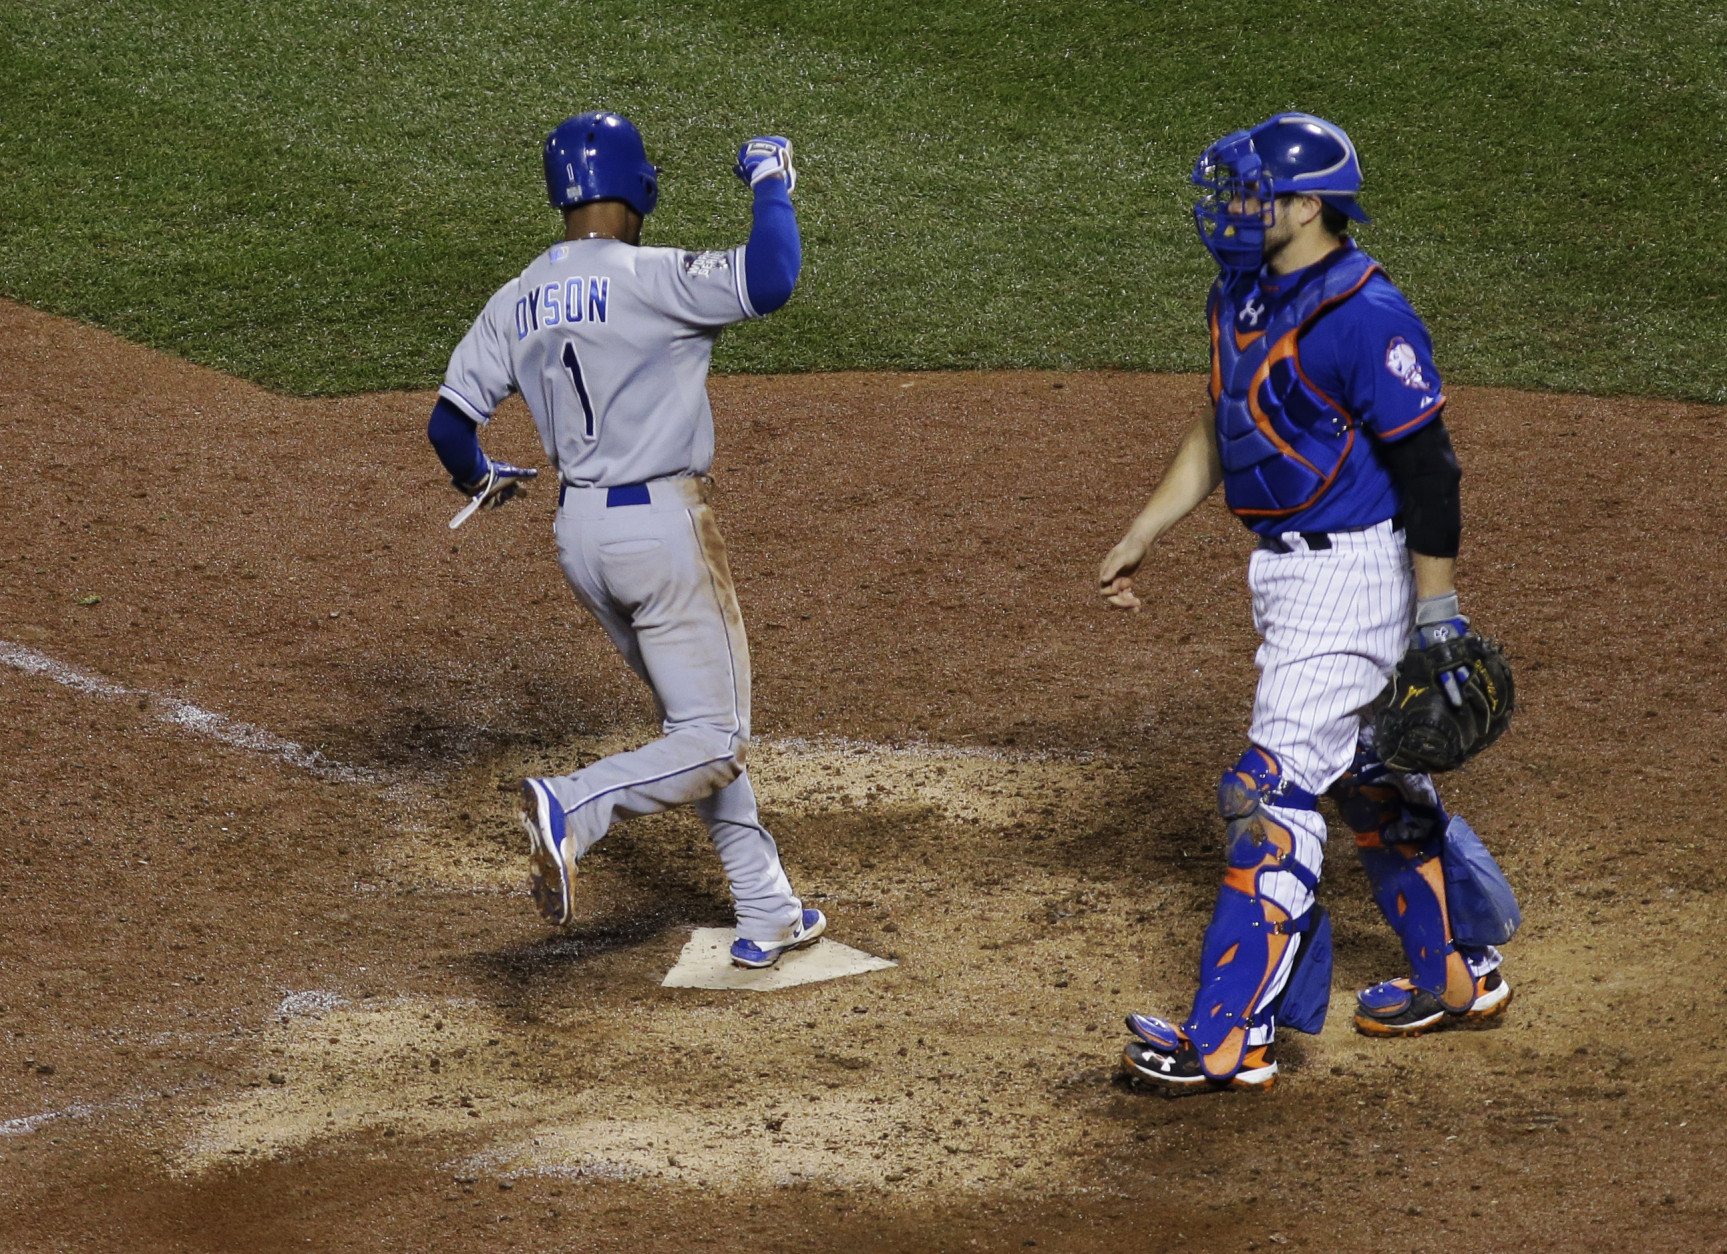 New York Mets catcher Travis d'Arnaud watches Kansas City Royals' Jarrod Dyson celebrates after scoring on an RBI single by Christian Colon during the 12th inning of Game 5 of the Major League Baseball World Series Monday, Nov. 2, 2015, in New York. (AP Photo/Matt Slocum)